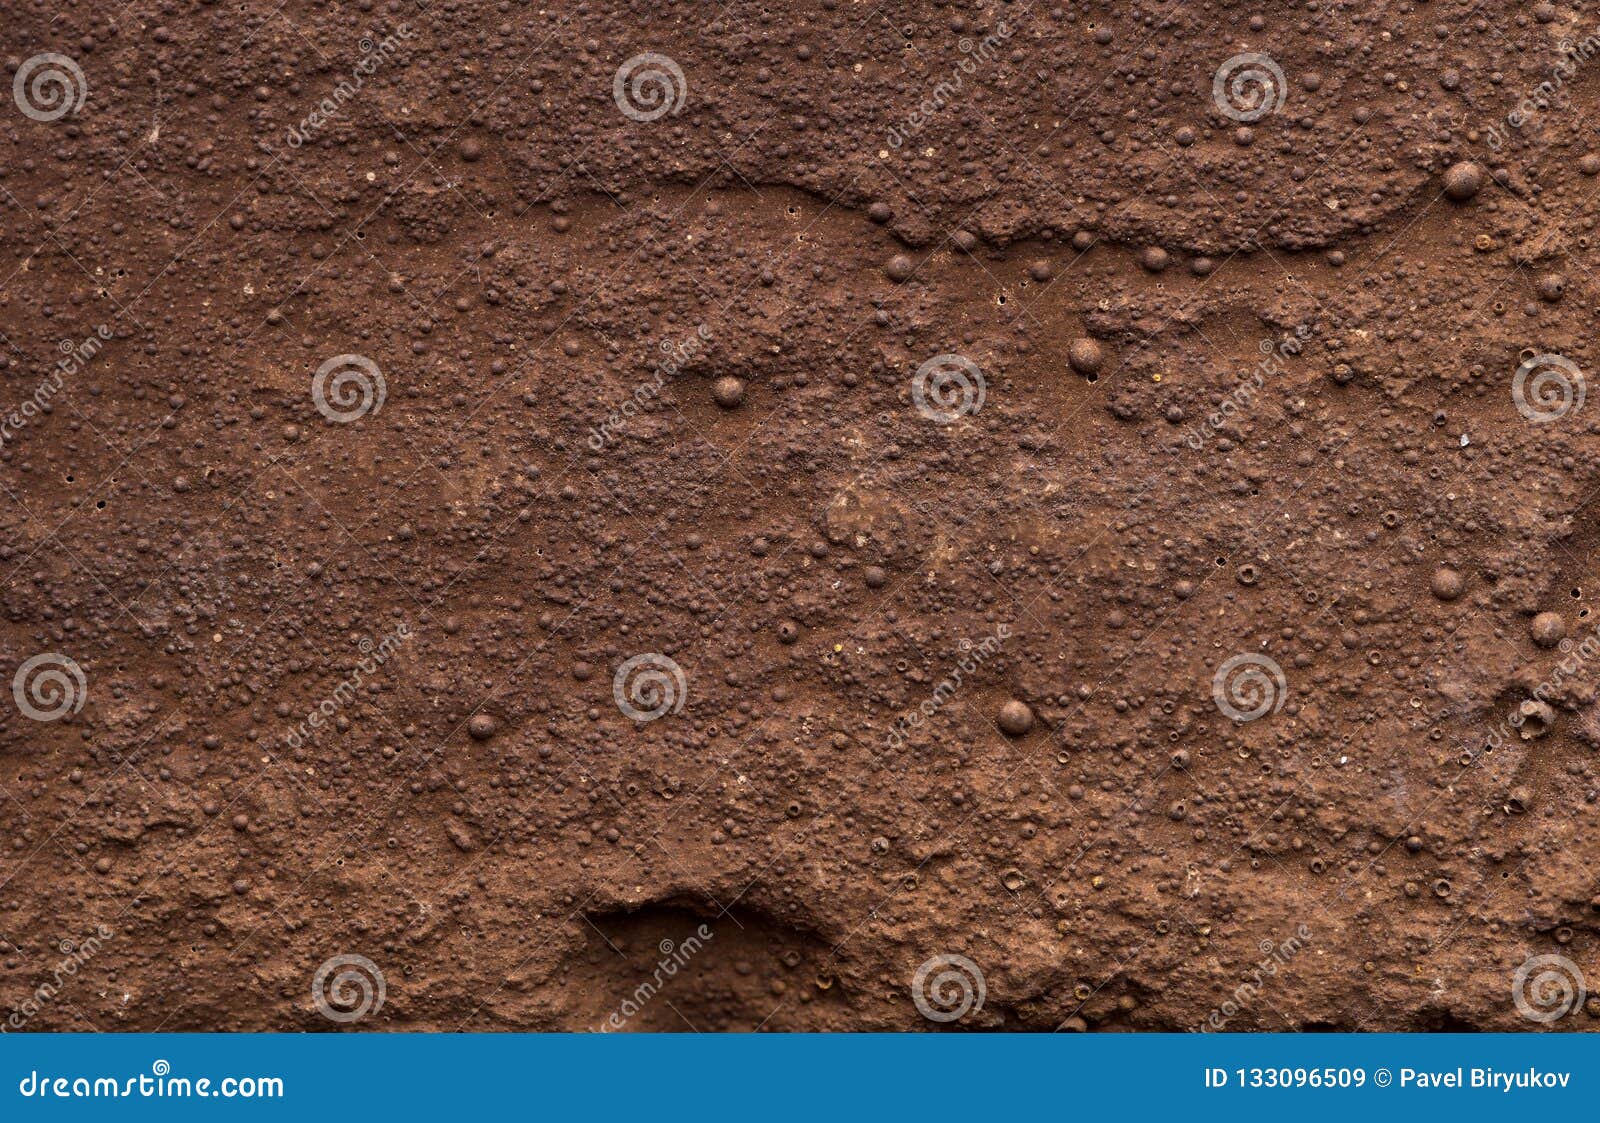 Macro Shooting Texture of Brown Clay Wall Stock Image - Image of concrete,  cement: 133096509